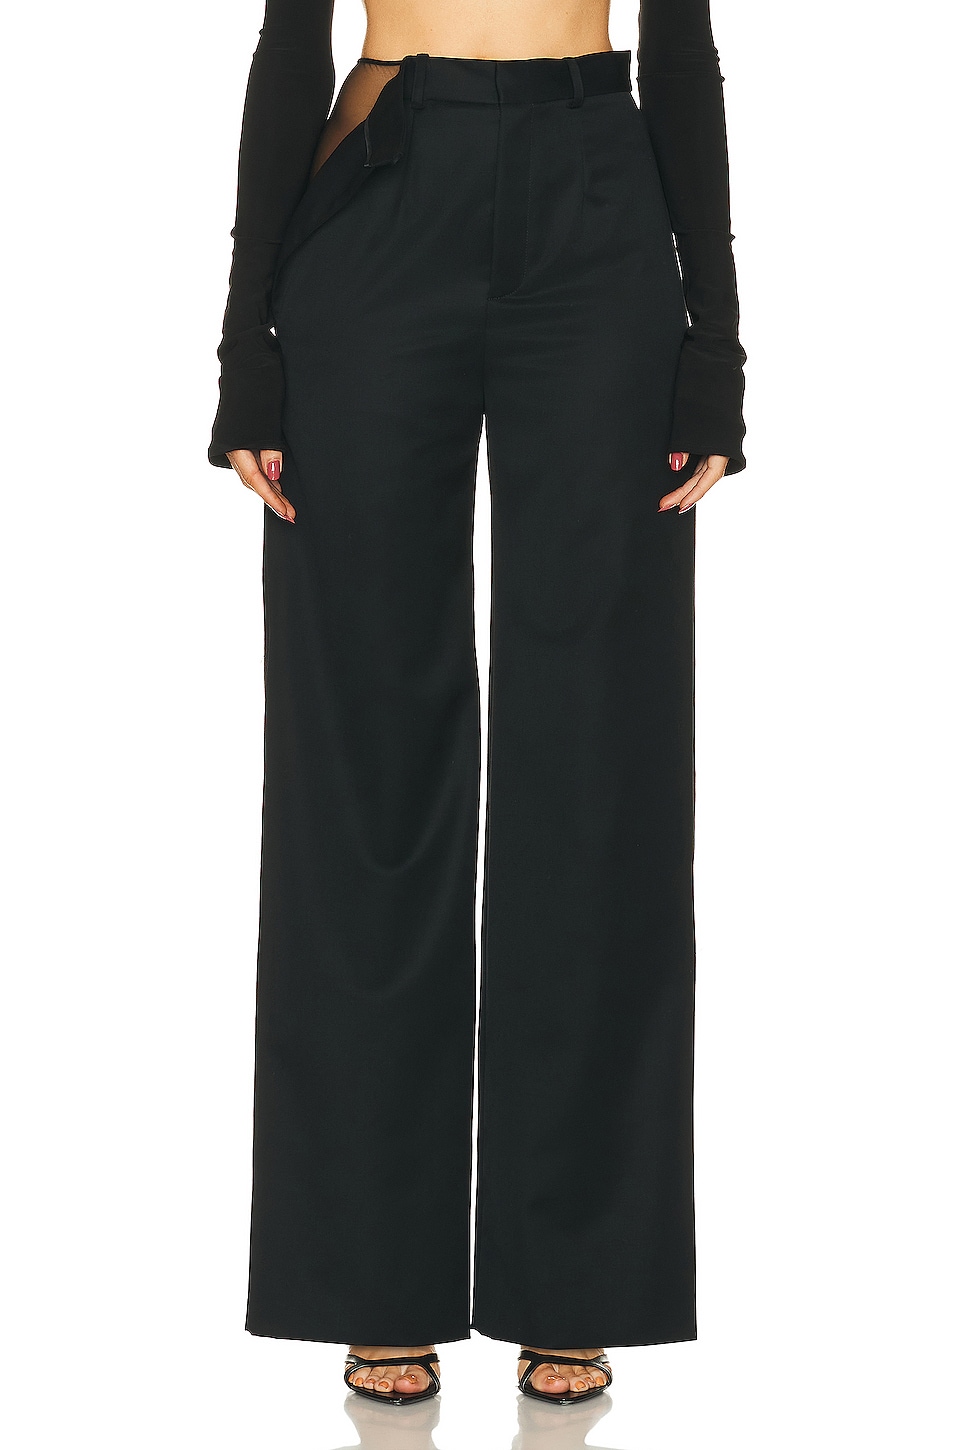 Image 1 of Grace Ling Peek Open Thigh Pant in Black